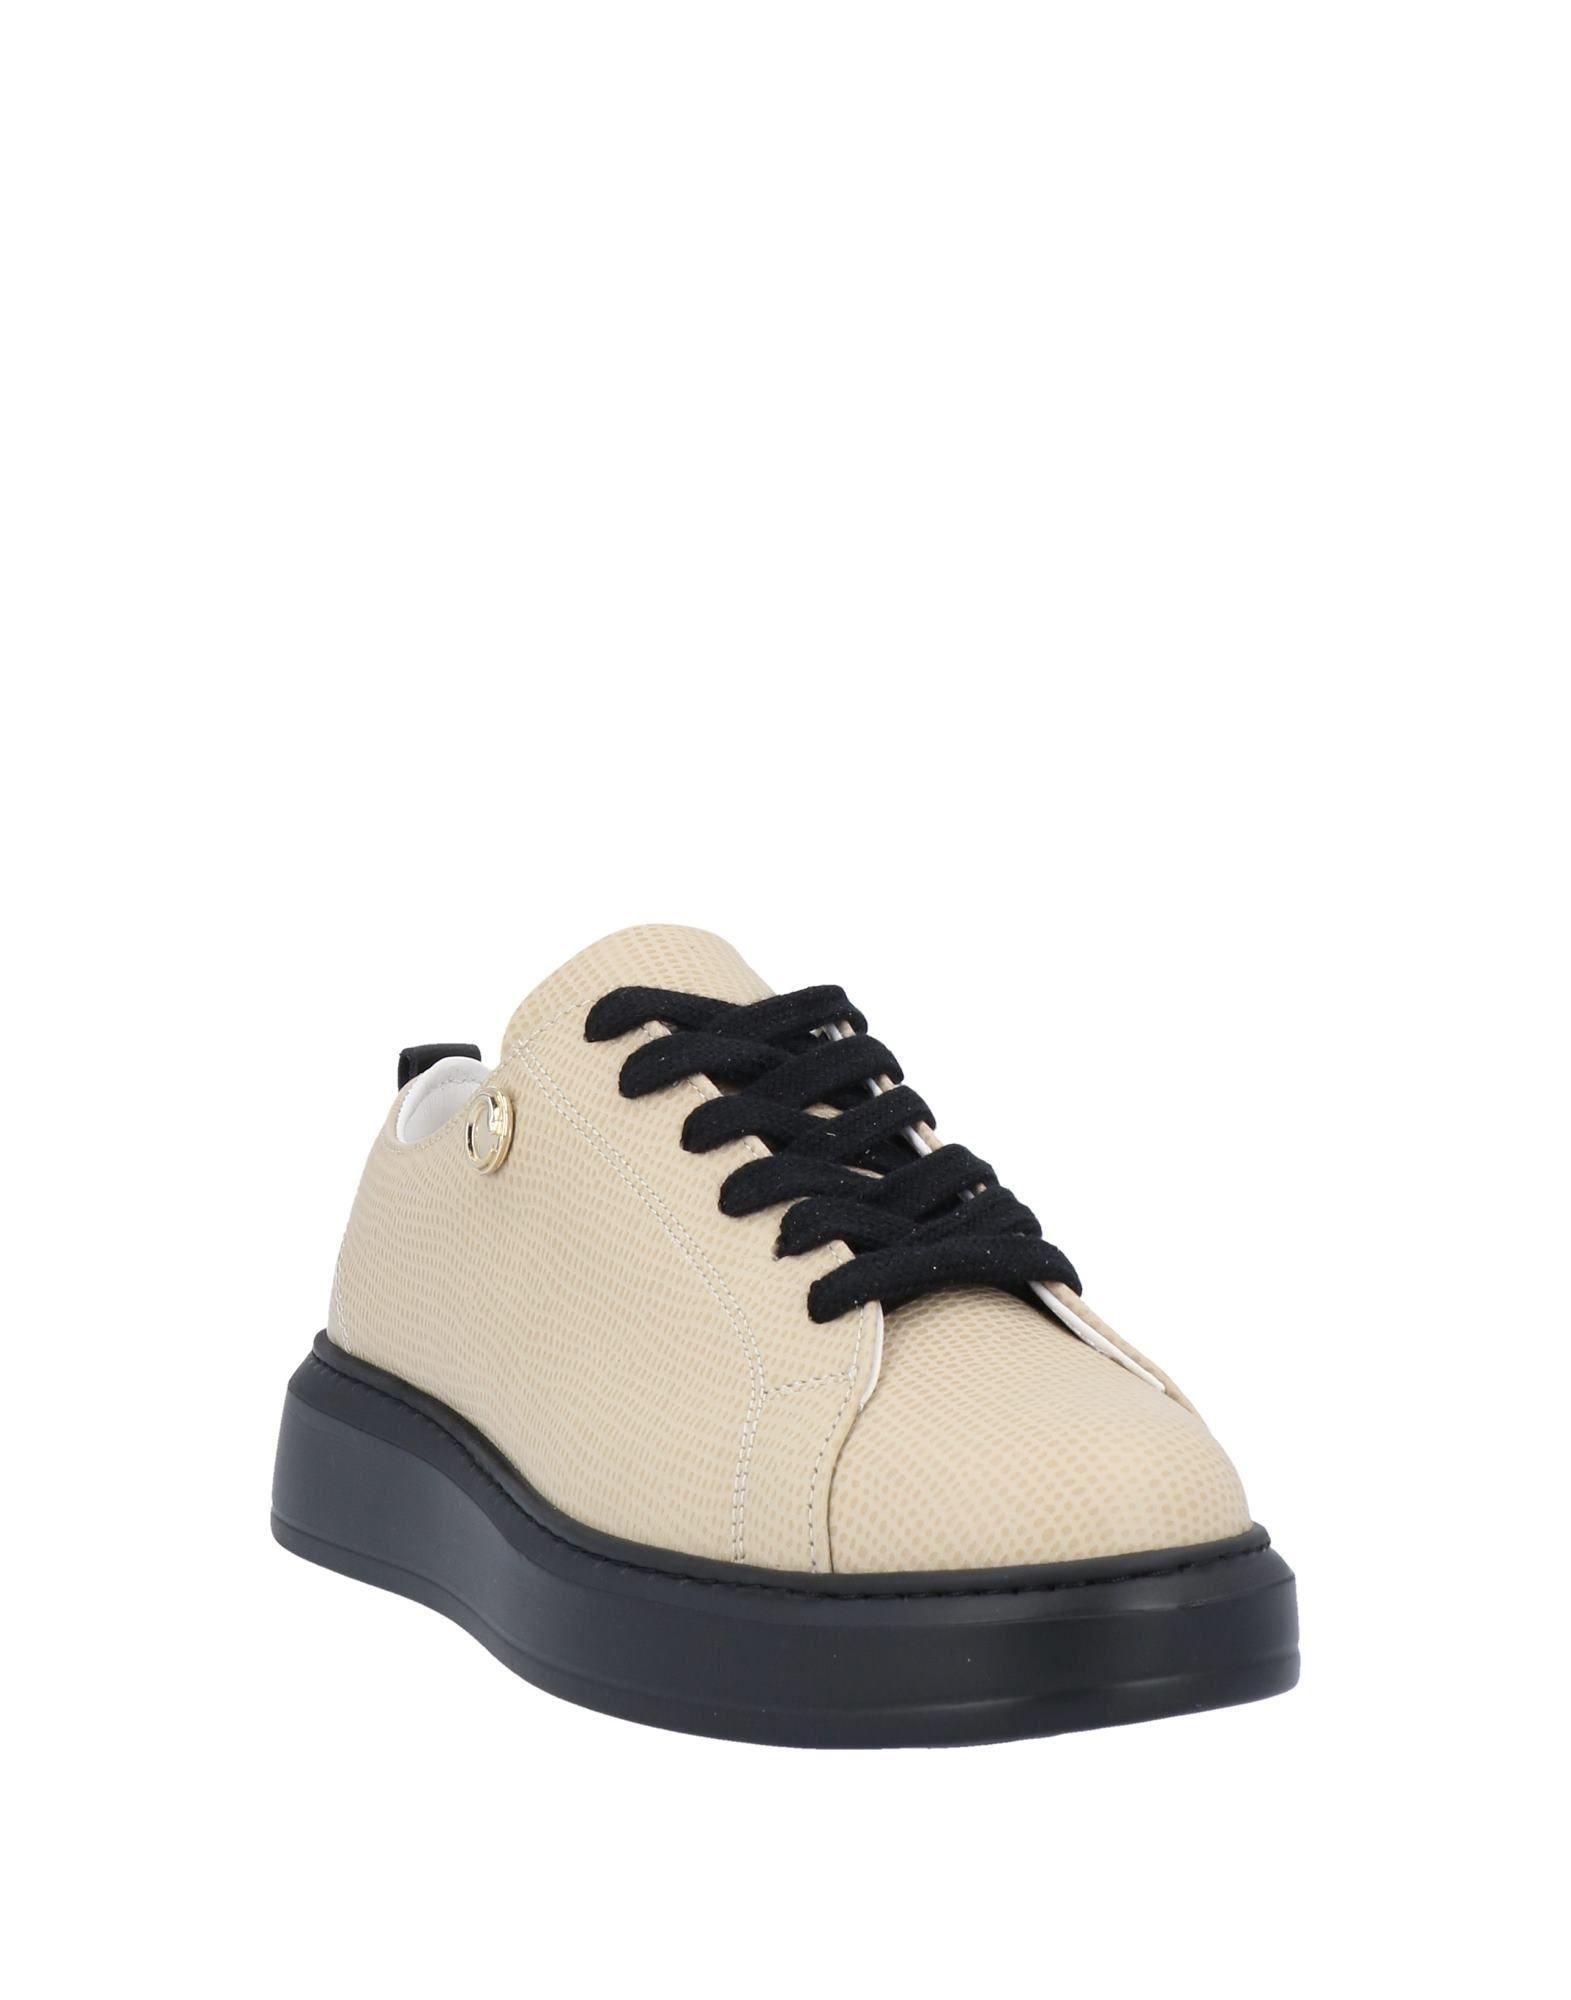 Class Roberto Cavalli Leather Trainers in Beige (Natural) - Lyst